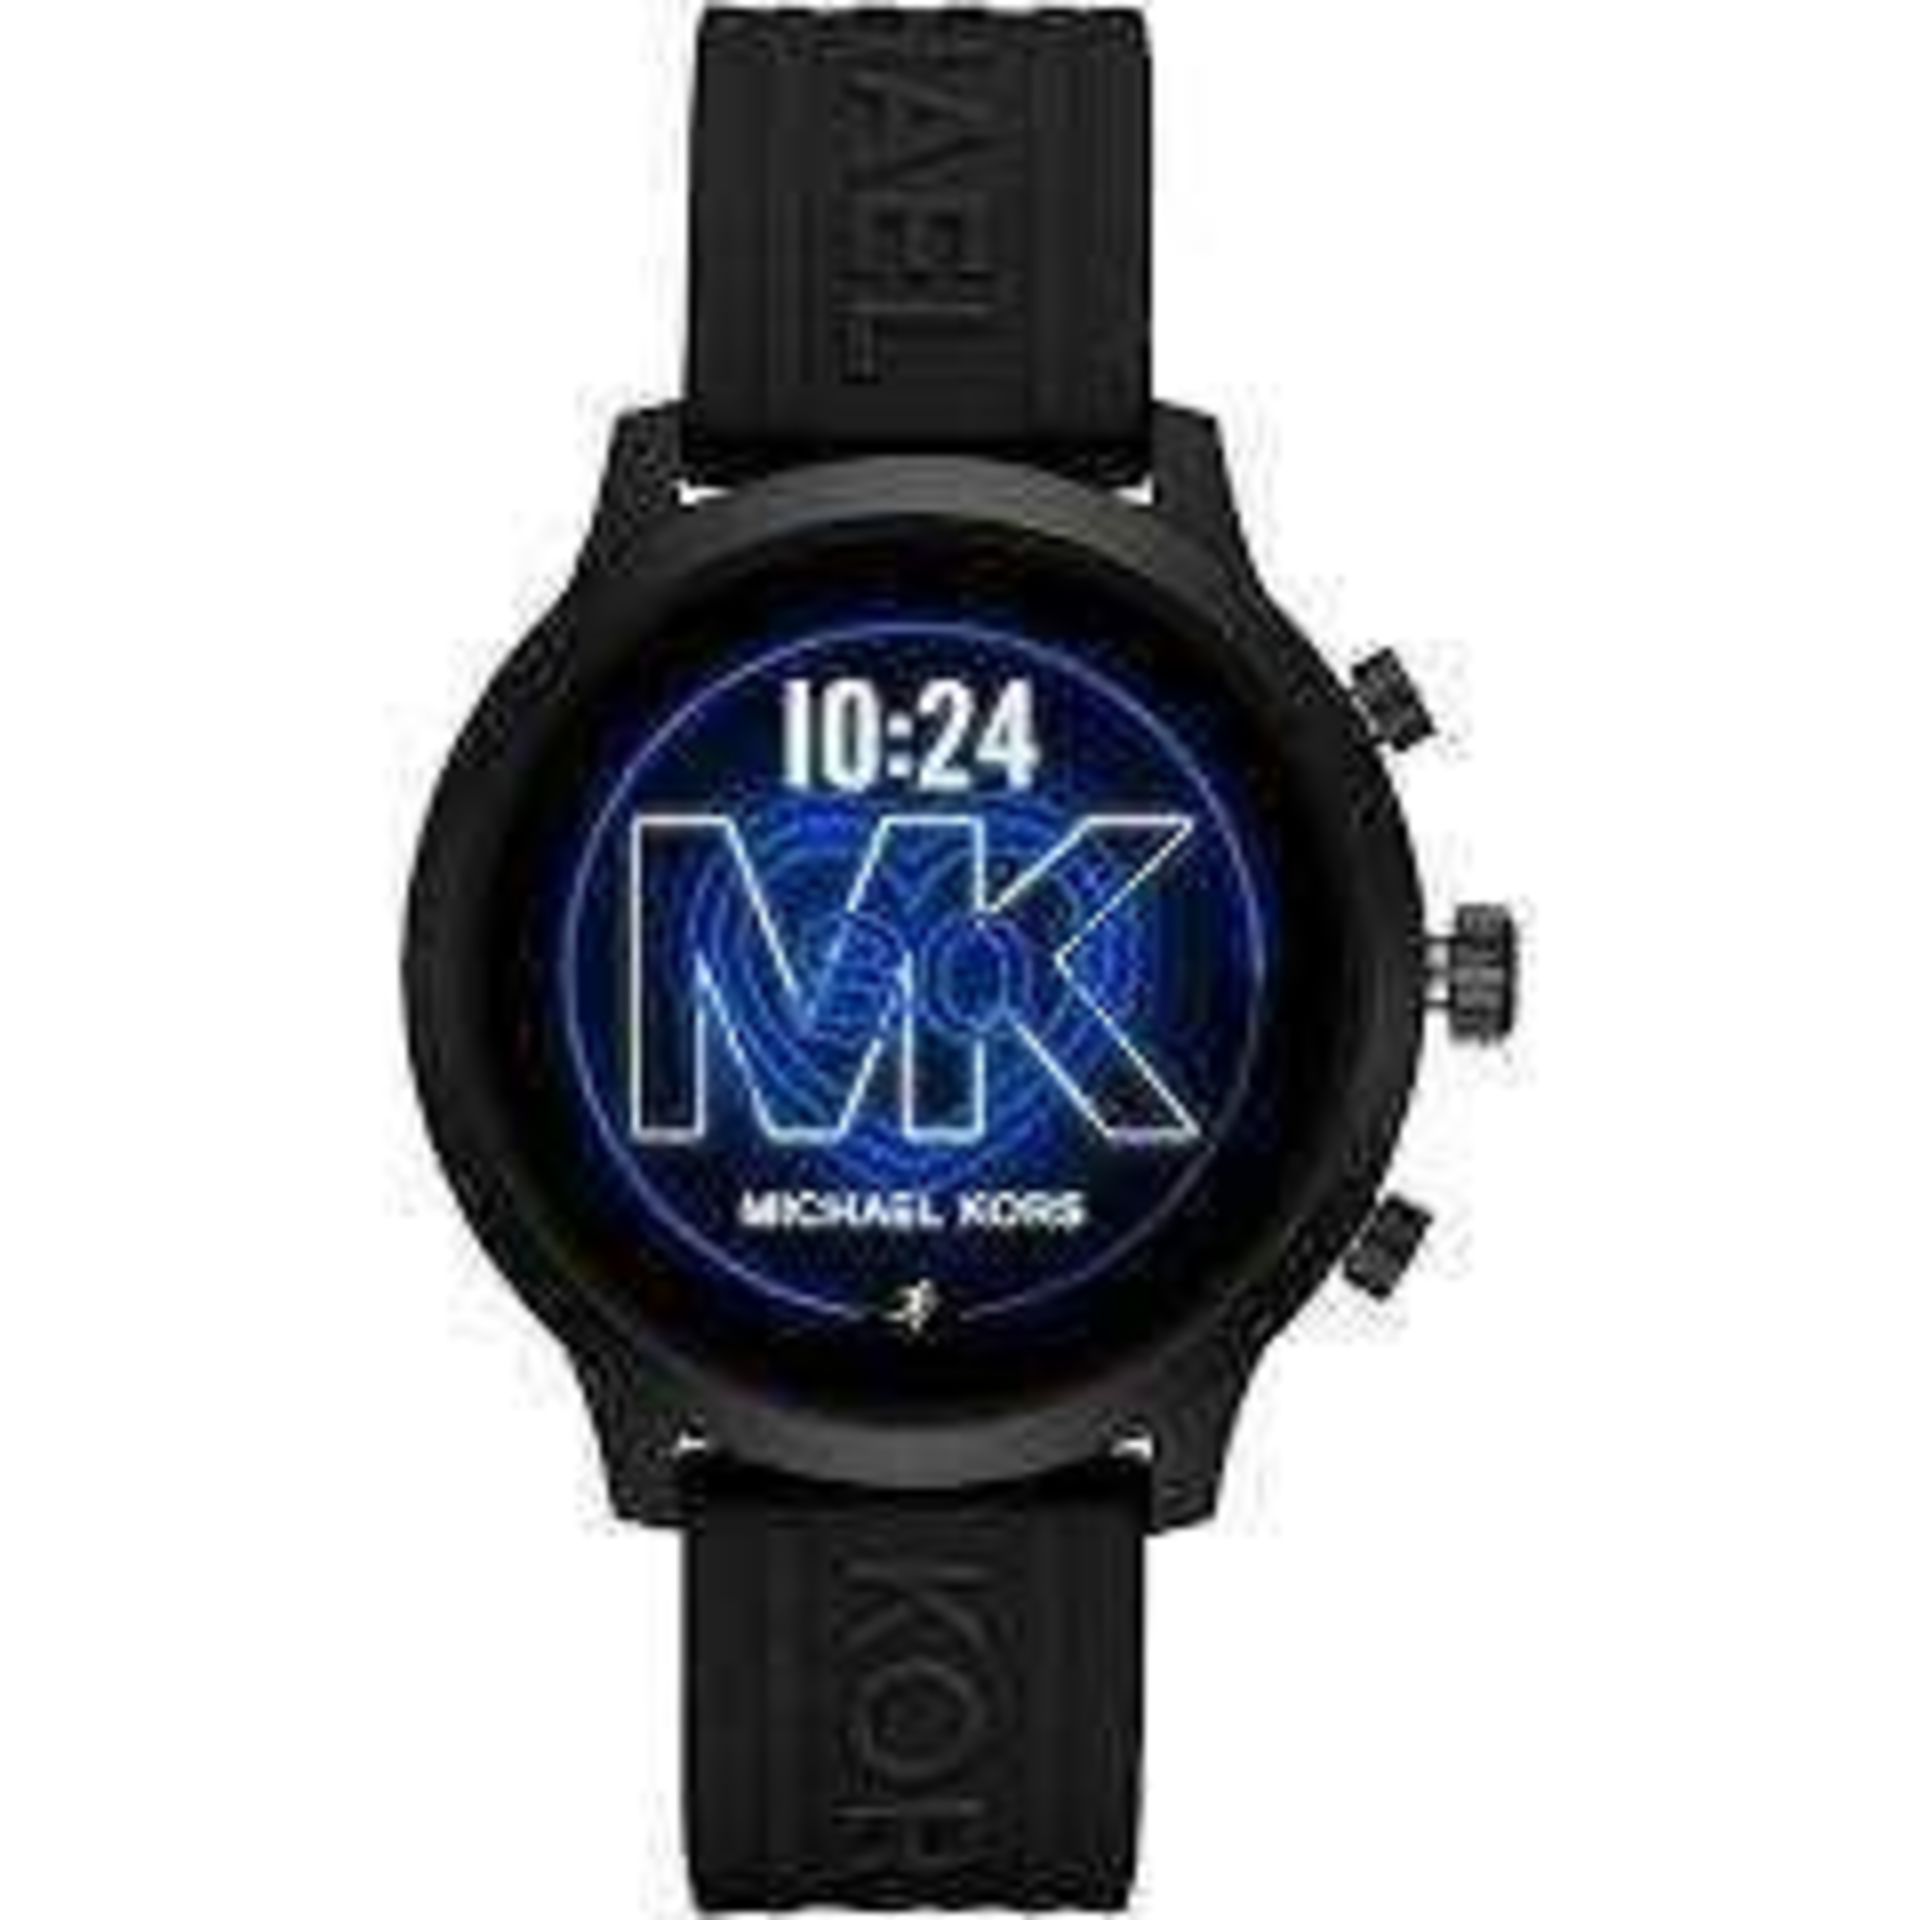 RRP £120 Michael Kors Mkt072 4Th Generation Smart Watch (4573117) (Appraisal Are Available On